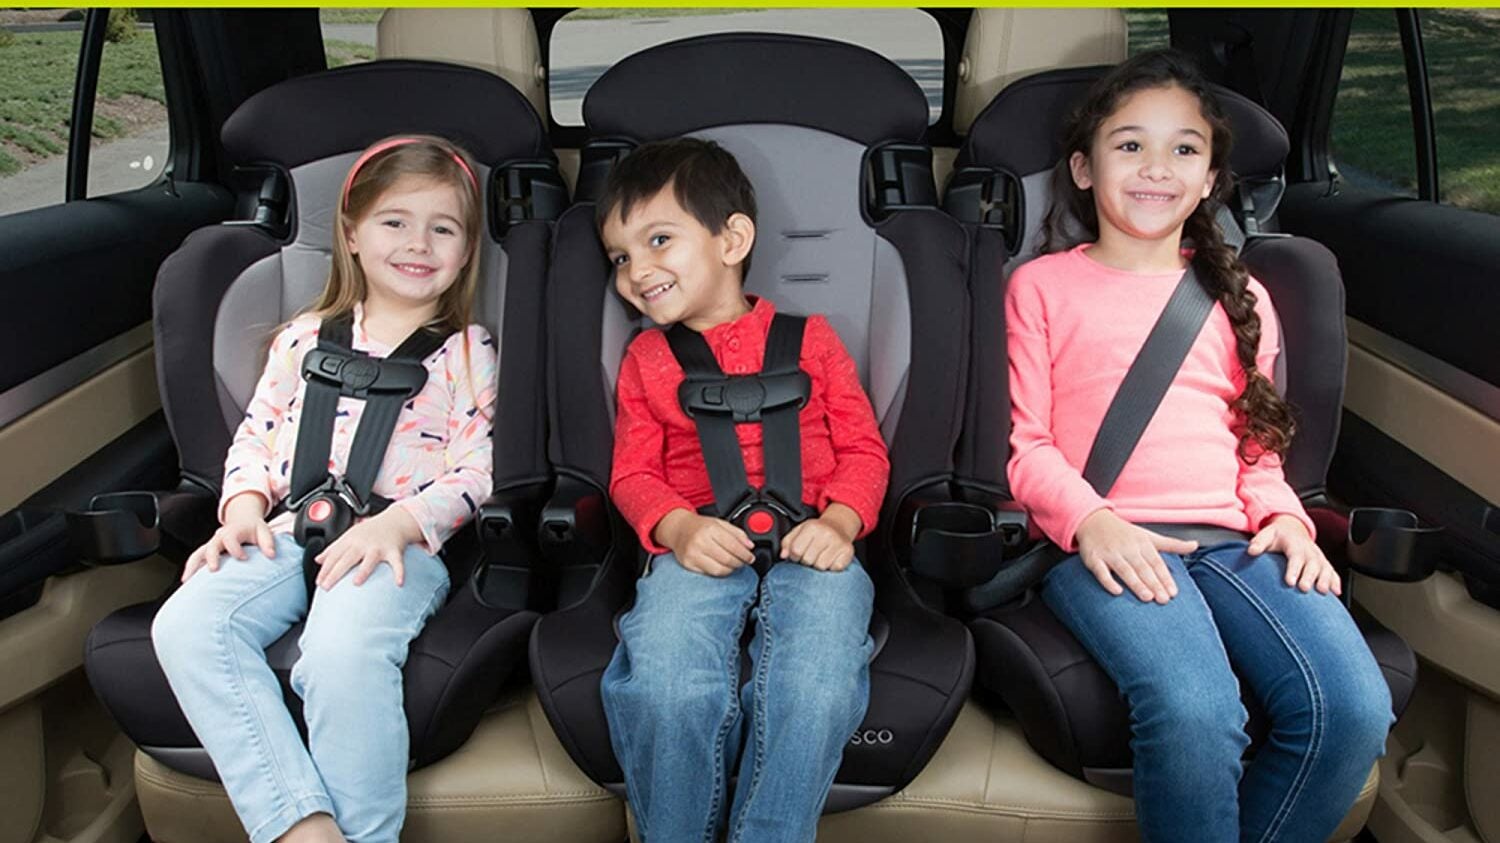 Best Car Seats For 4 Year Olds Review, Does 4 Year Old Need Car Seat